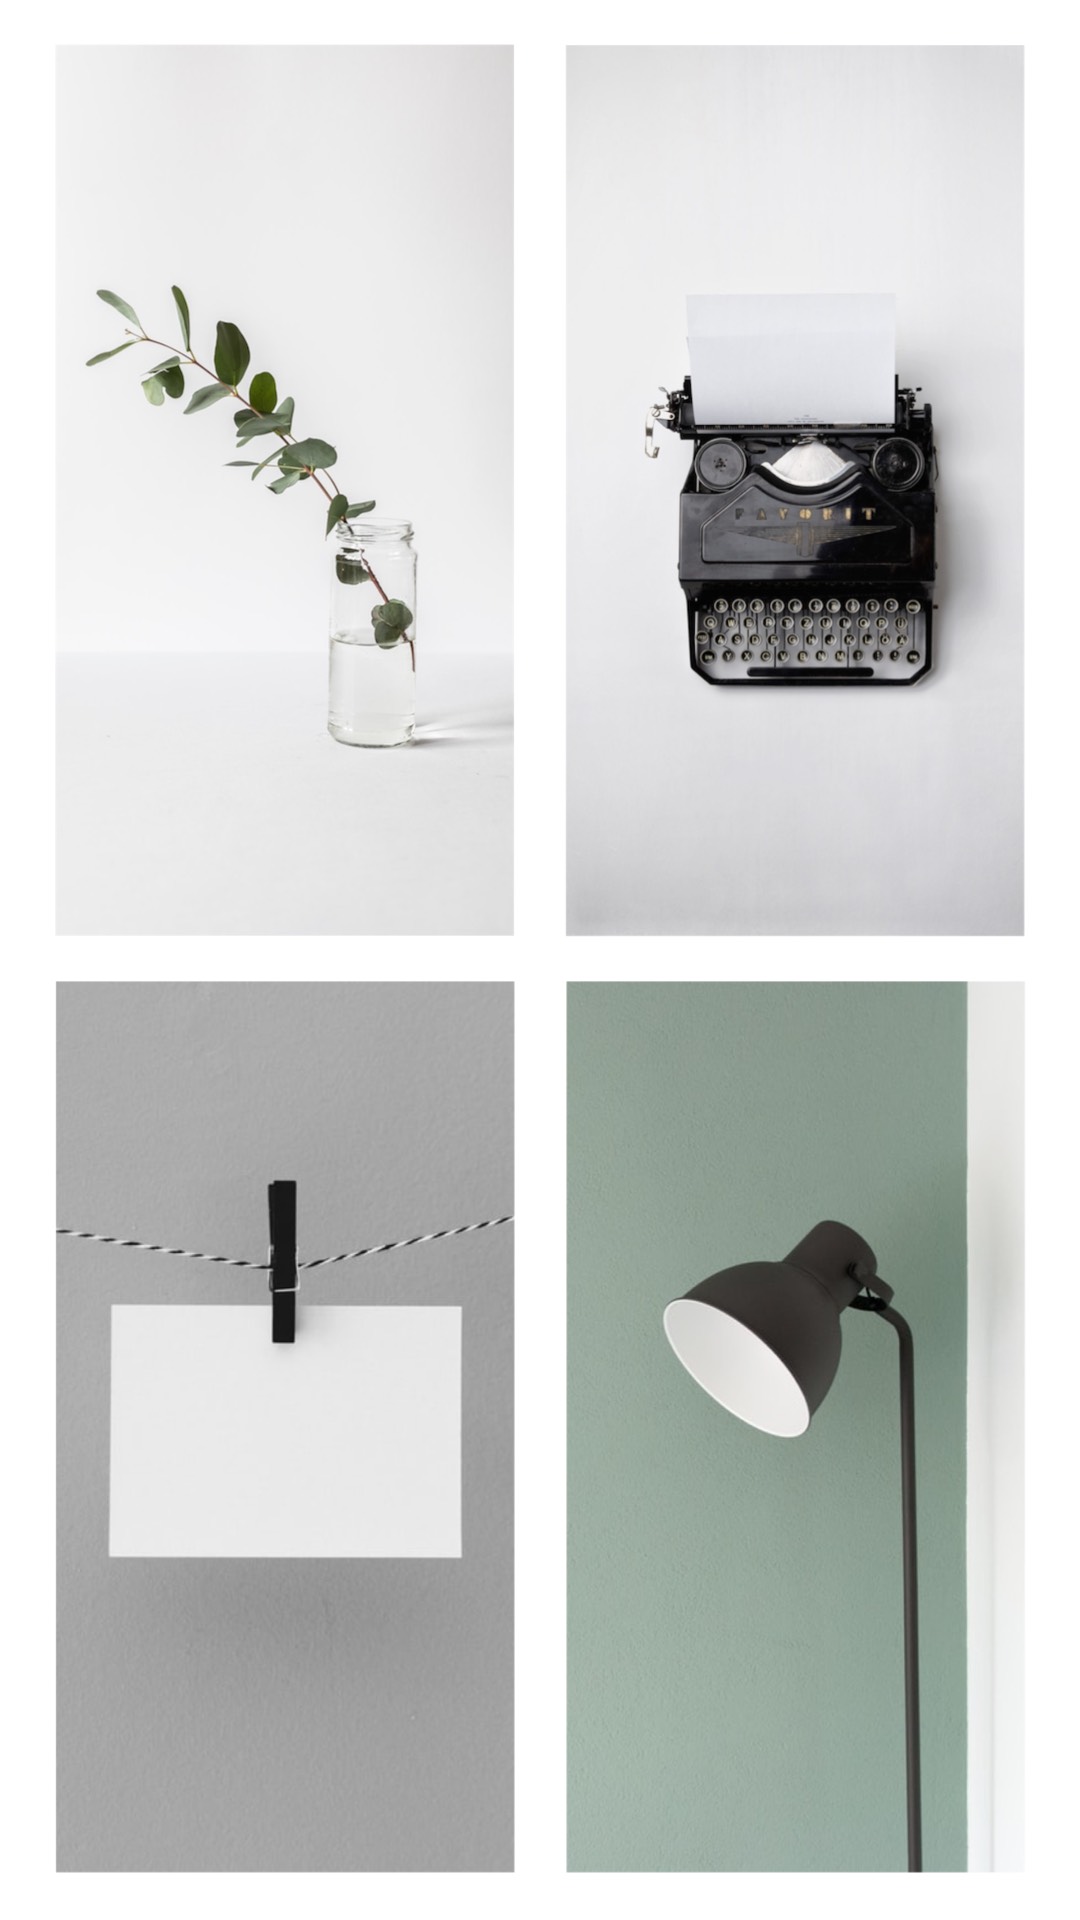 Leaf typewriter paper and lamp minimalist simple story template